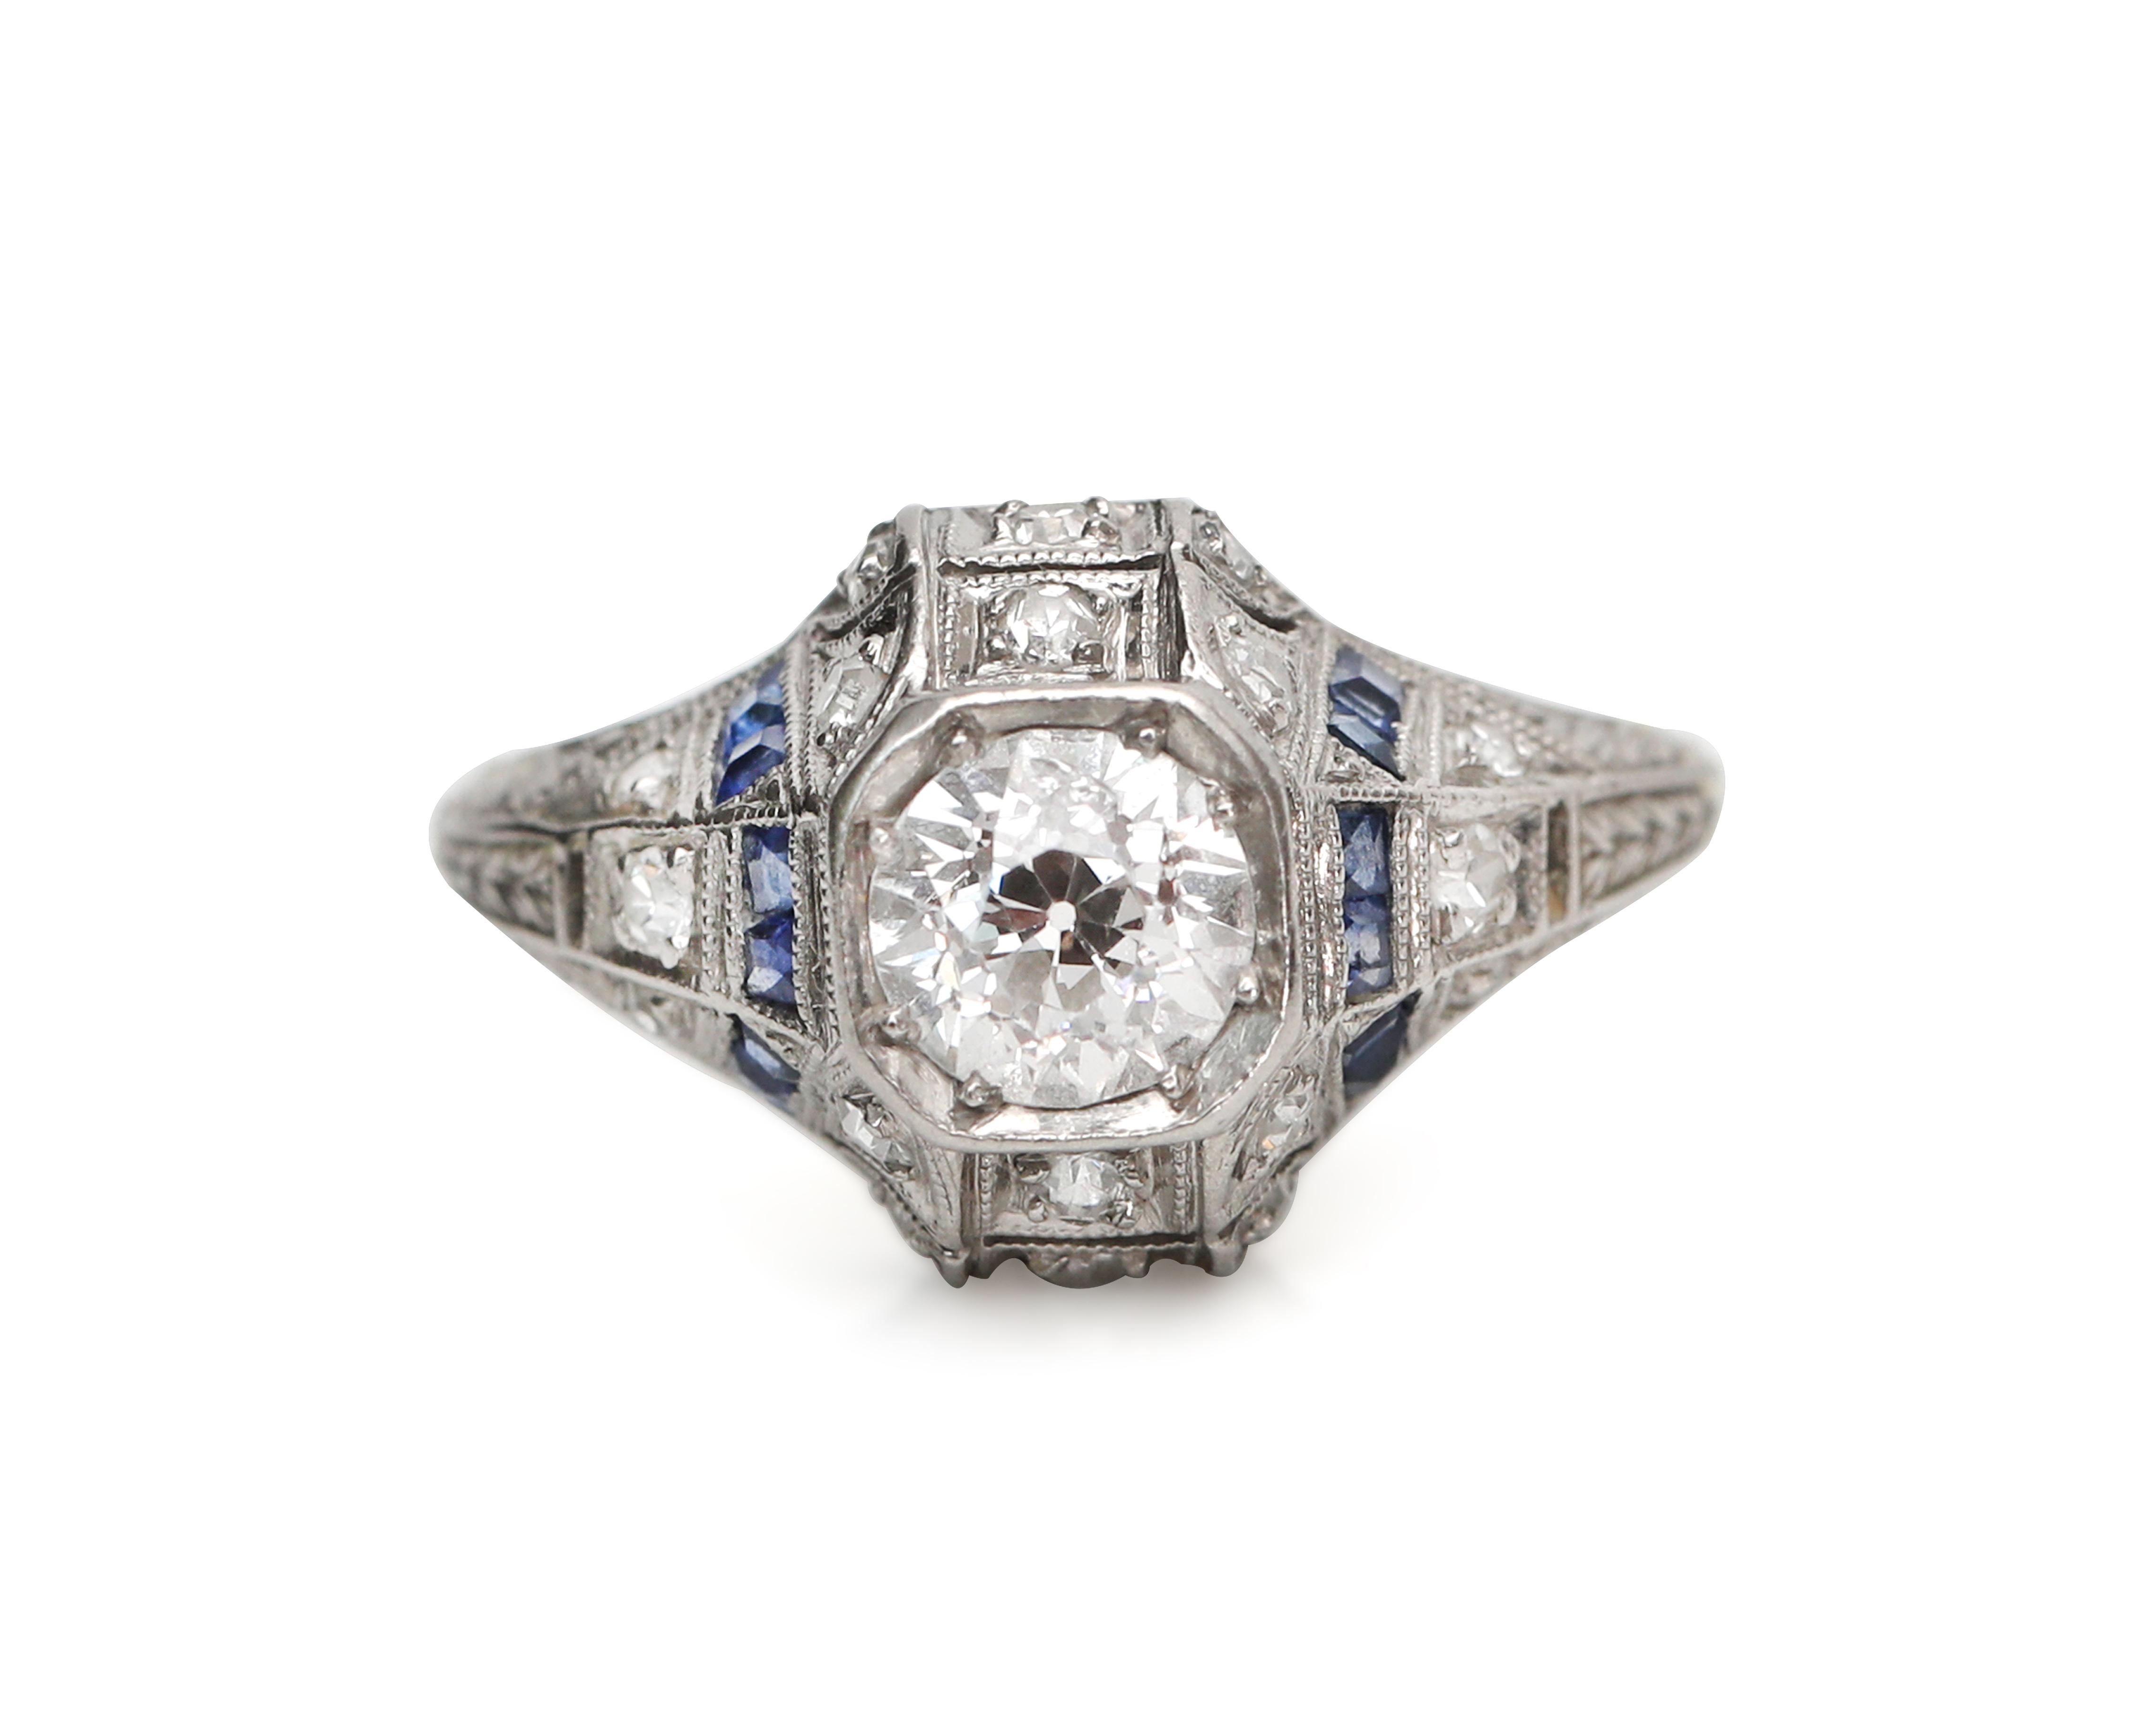 This fine example of Art Deco style is crafted in platinum with sapphire accents highlighting the stunning solitaire. The brilliant center diamond is approximately 0.76 carats and the correct Old European cut for the time period. The ring still